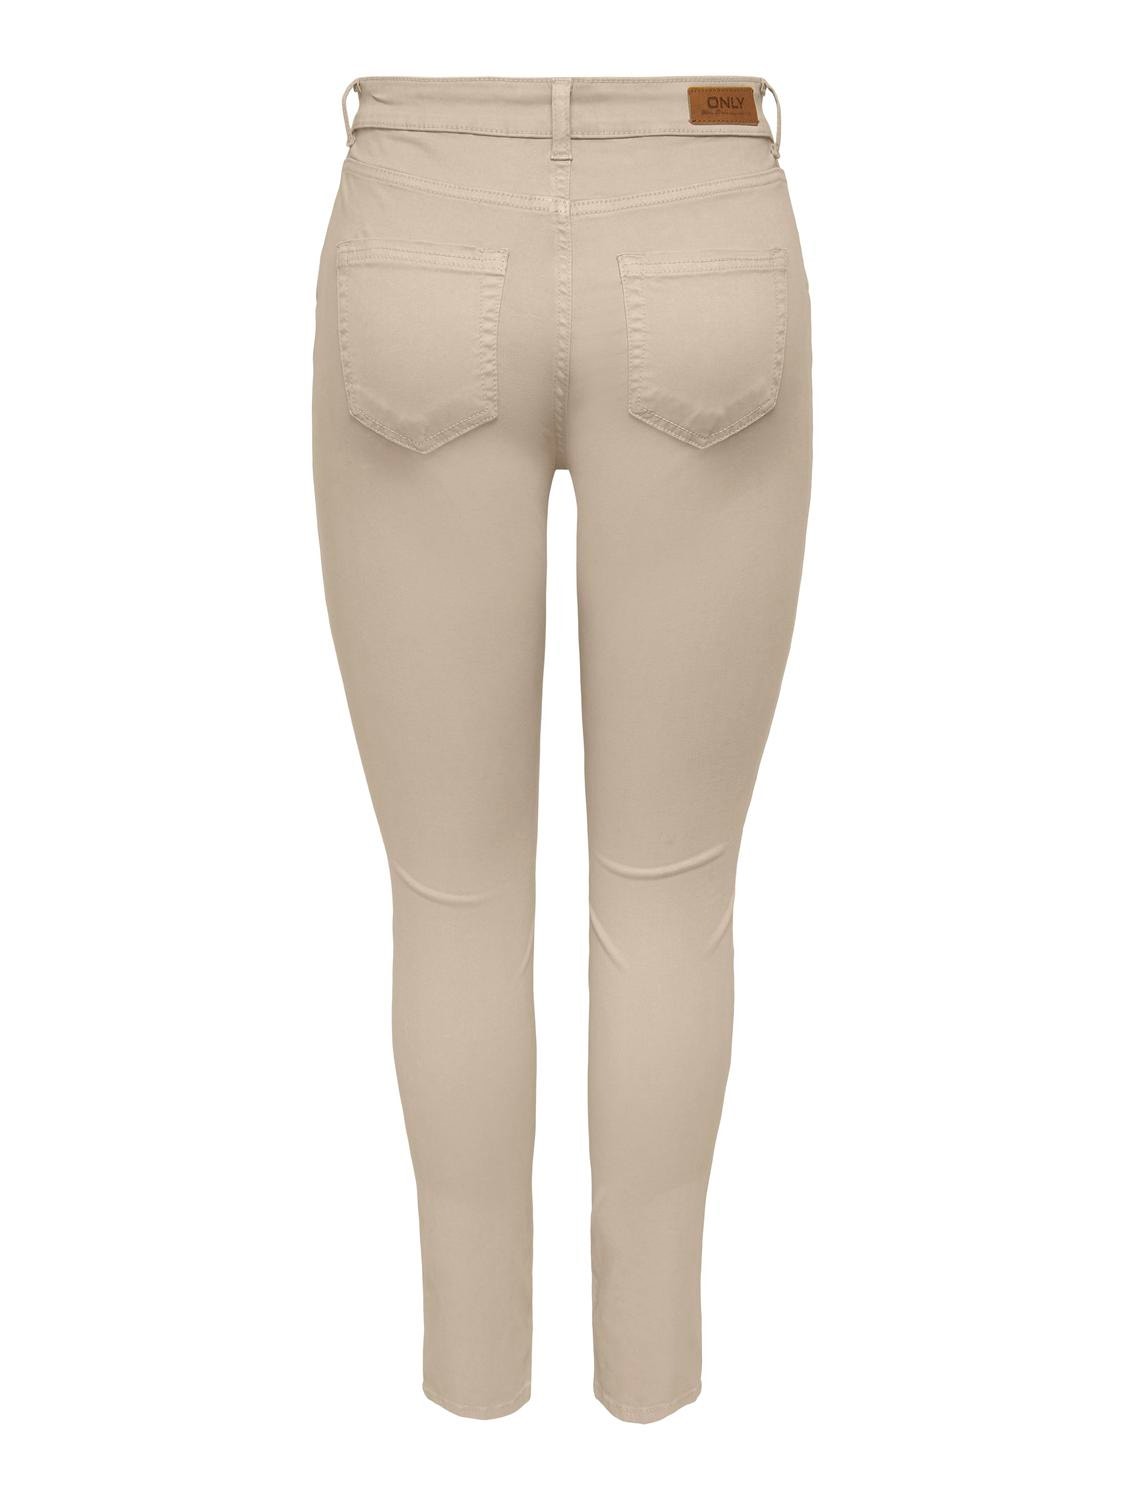 ONLY High waisted Chinos -Oxford Tan - 15278924